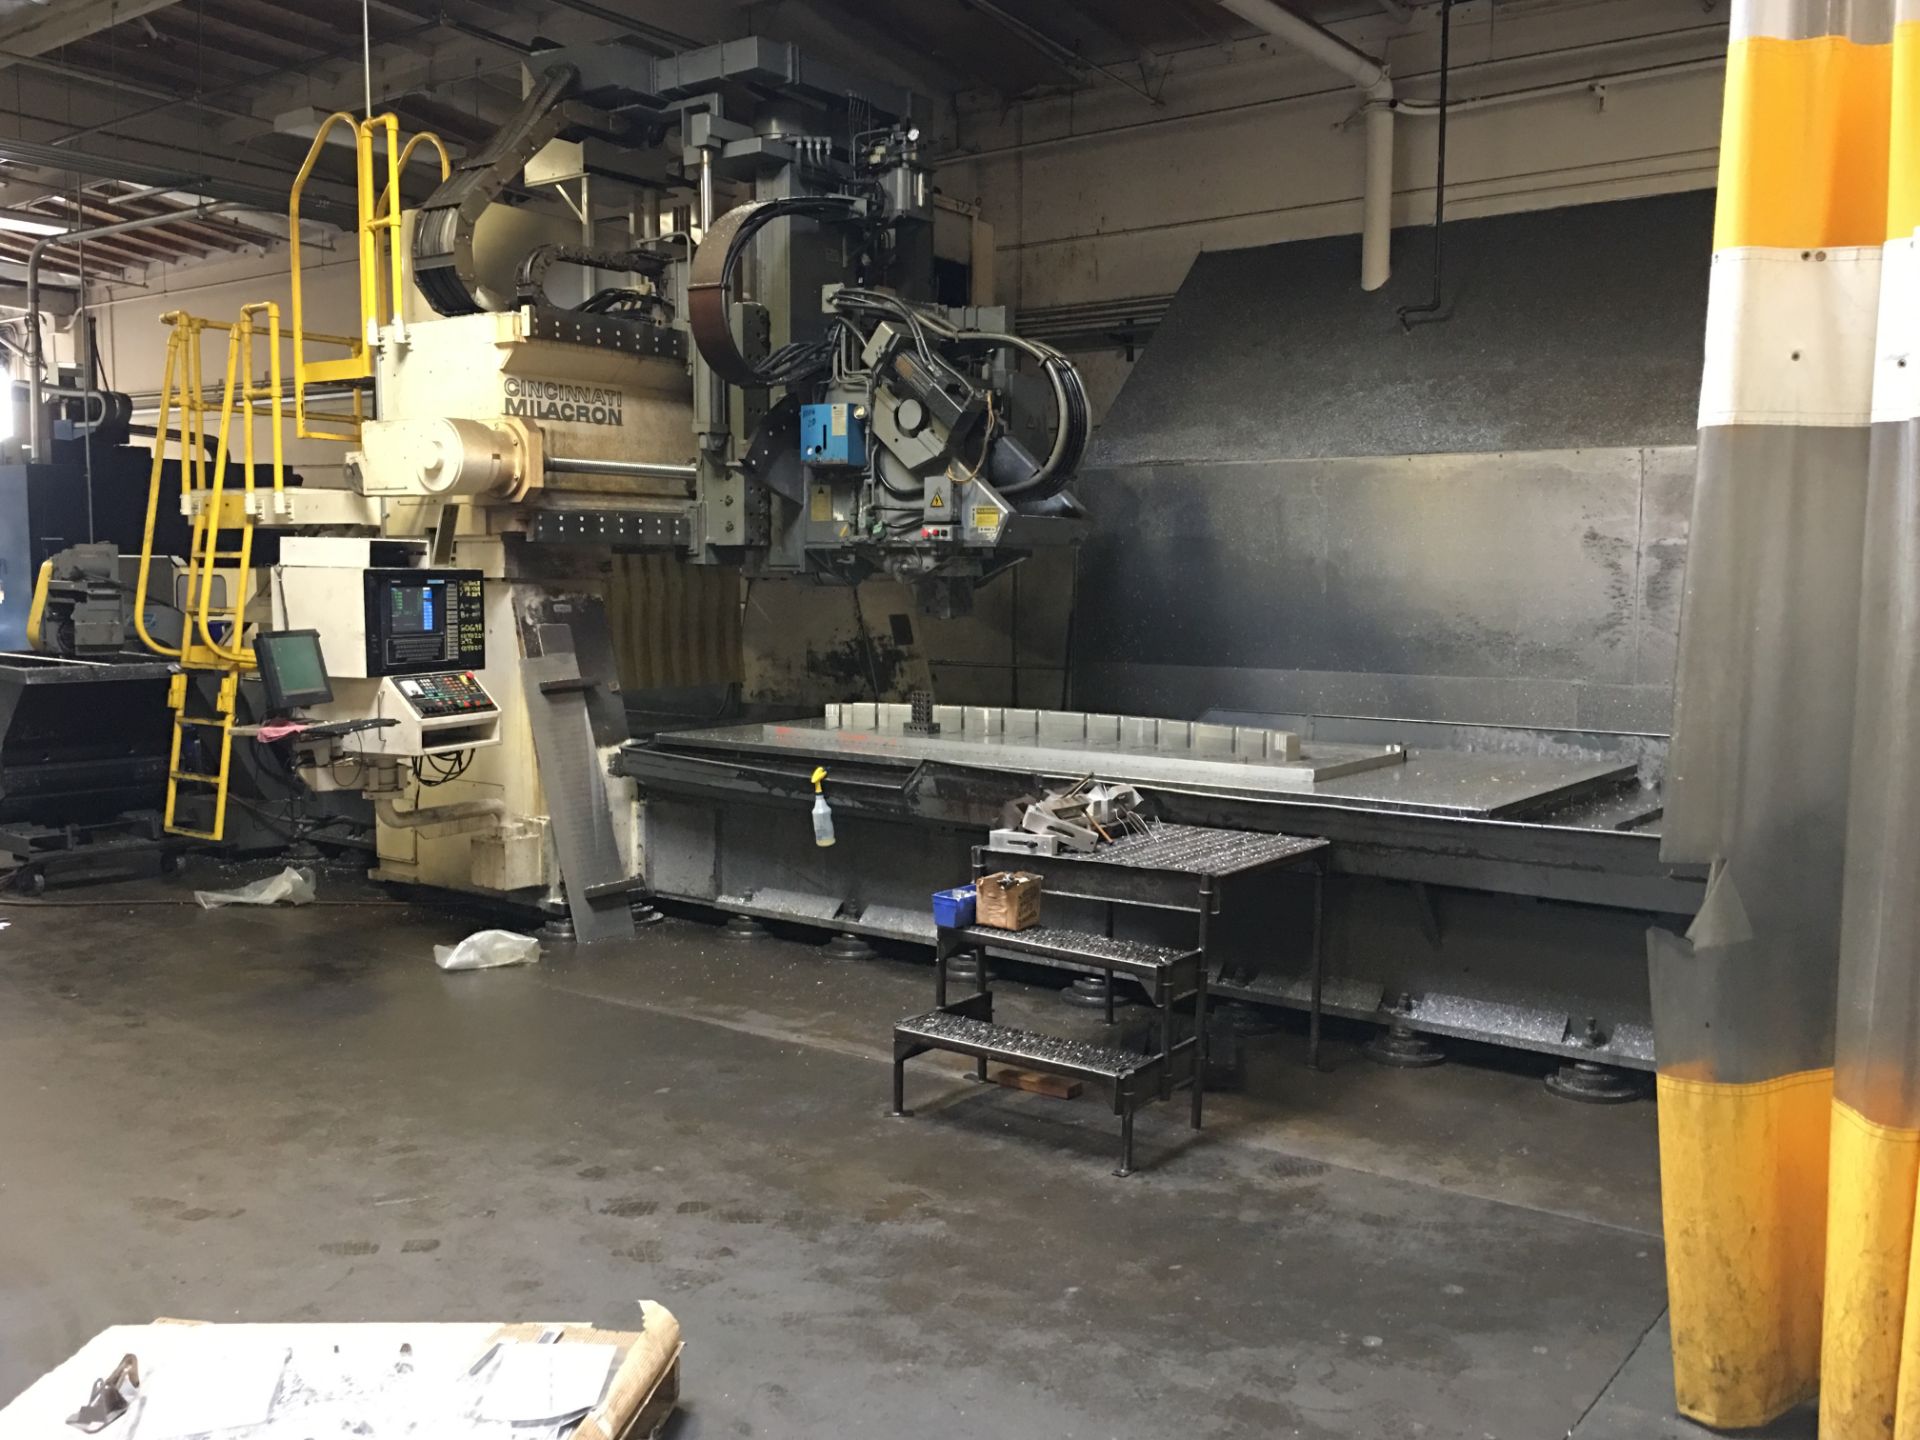 Cincinnati 30v 5-Axis Vertical CNC Profile Mill. Gantry Type, Single Spindle, 130” X 60” Table Size, - Image 5 of 9